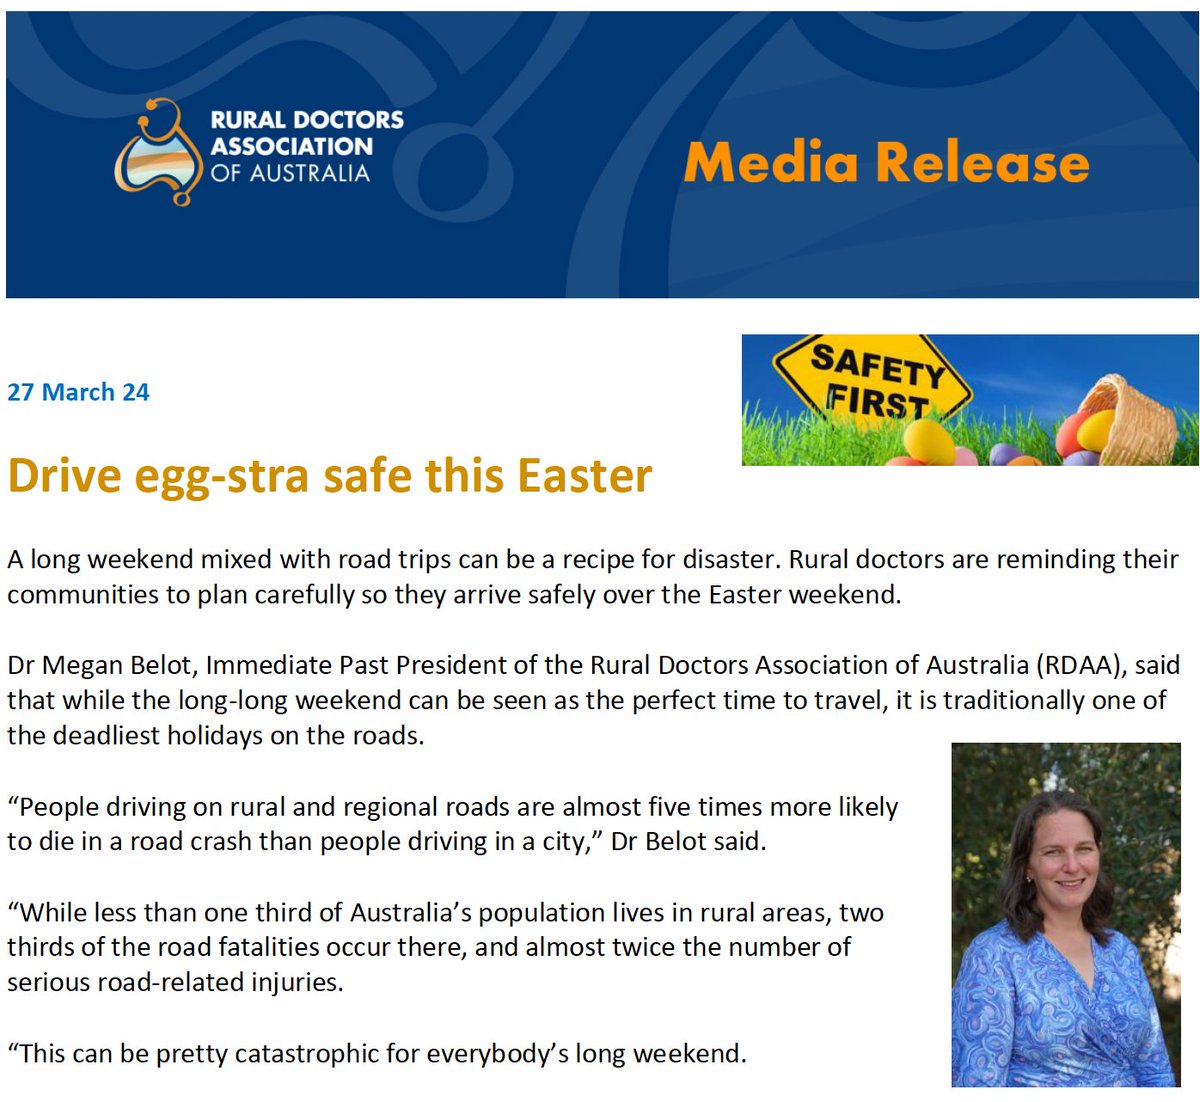 It's the Easter long-LONG weekend, so make sure you take it EGG-stra easy as you hop along your road trip... People are 5 x more likely to die & twice as likely to be injured on rural roads. Stay safe peeps! 👉bit.ly/3xaDQVd #ruralhealth #medtwitter #eastersafety